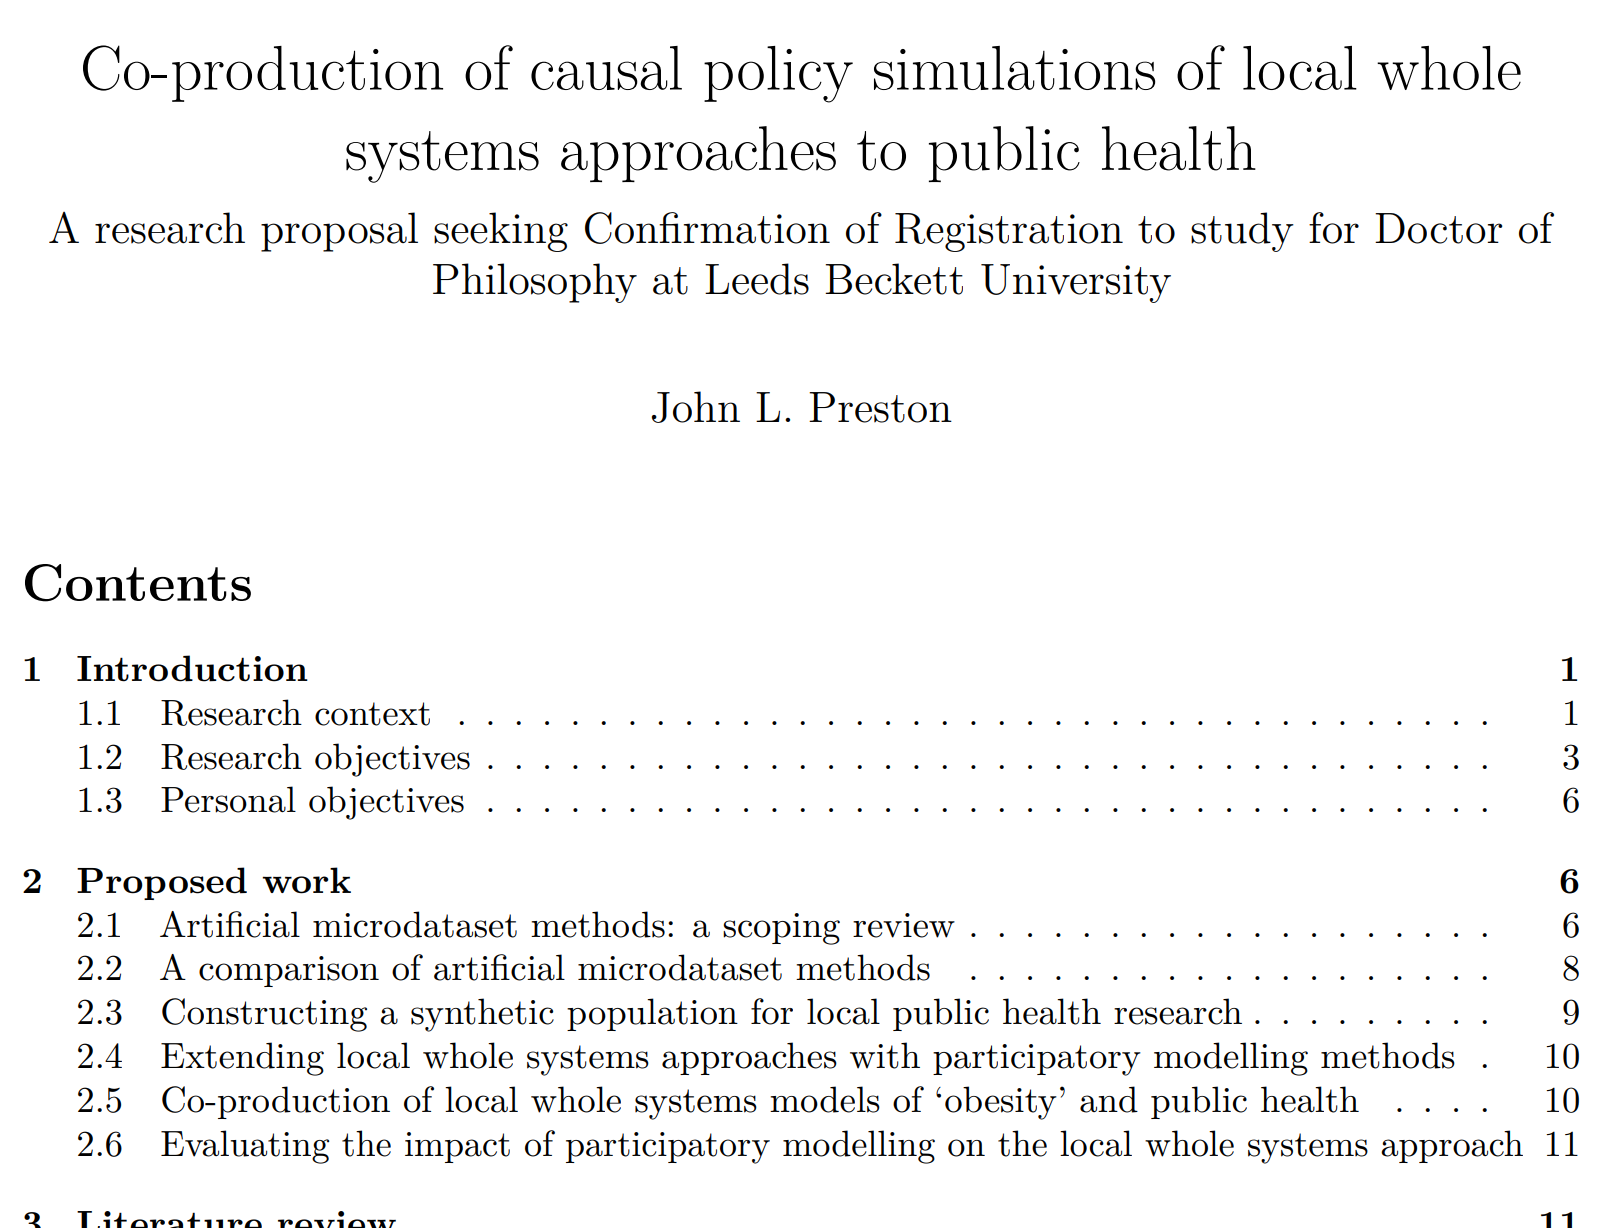 PhD research proposal: Co-production of causal policy simulations of local whole systems approaches to public health